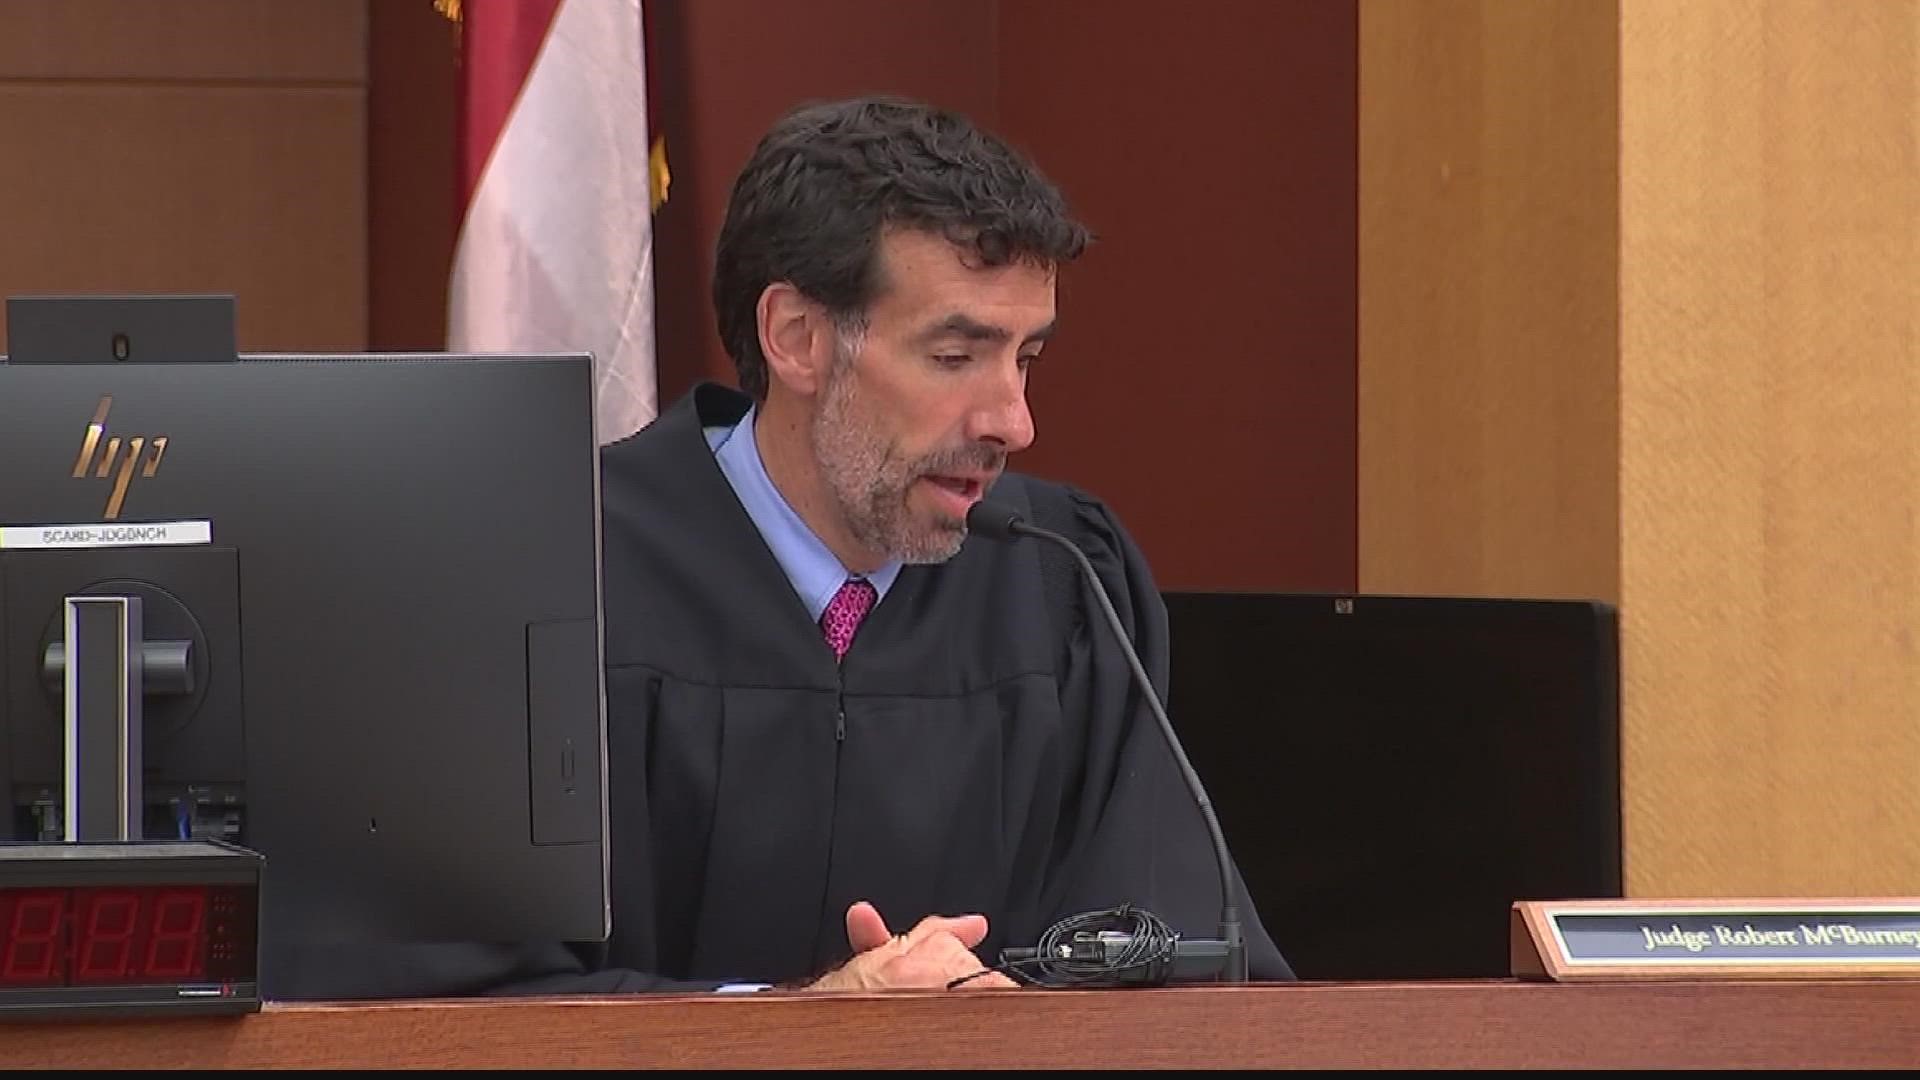 Judge Robert C. I. McBurney is taking the time to look over arguments before issuing an order.